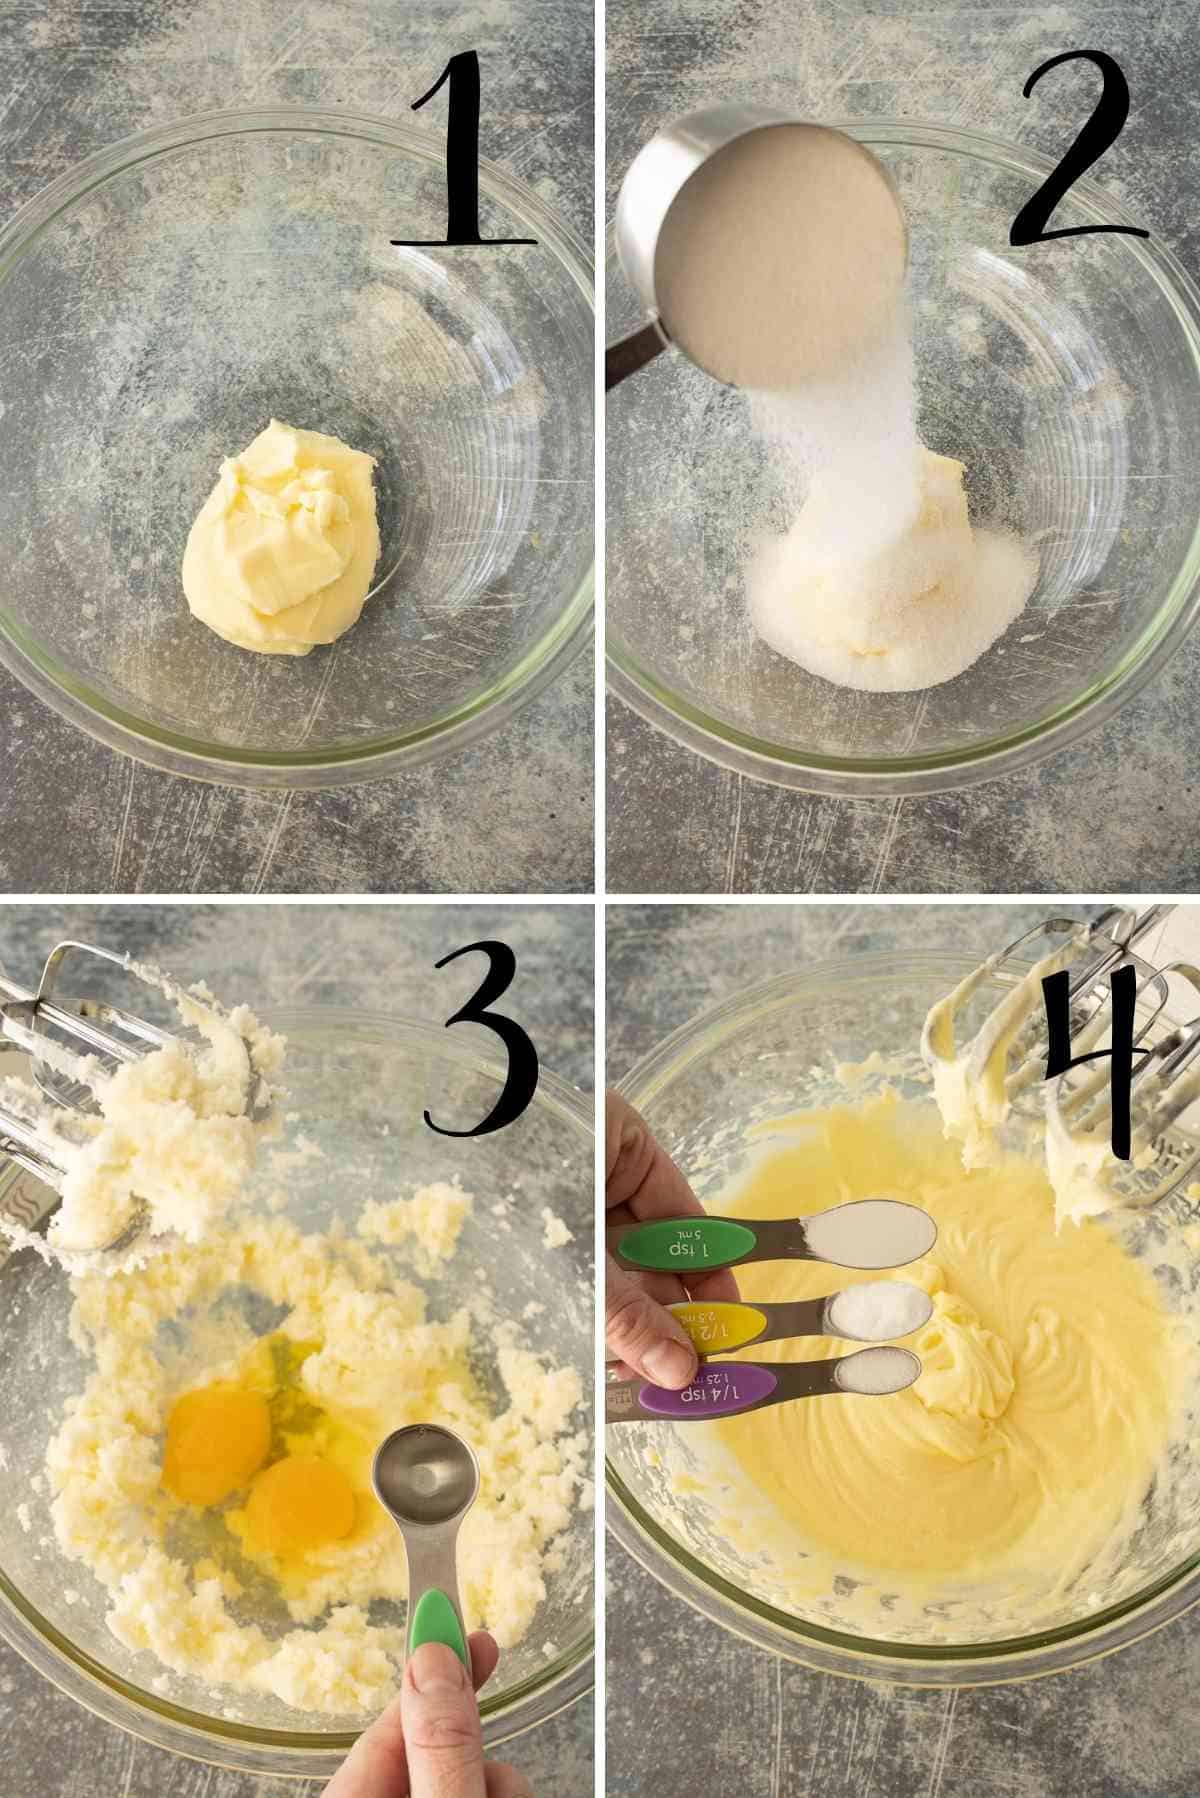 Cream the butter and the sugar before adding other ingredients.